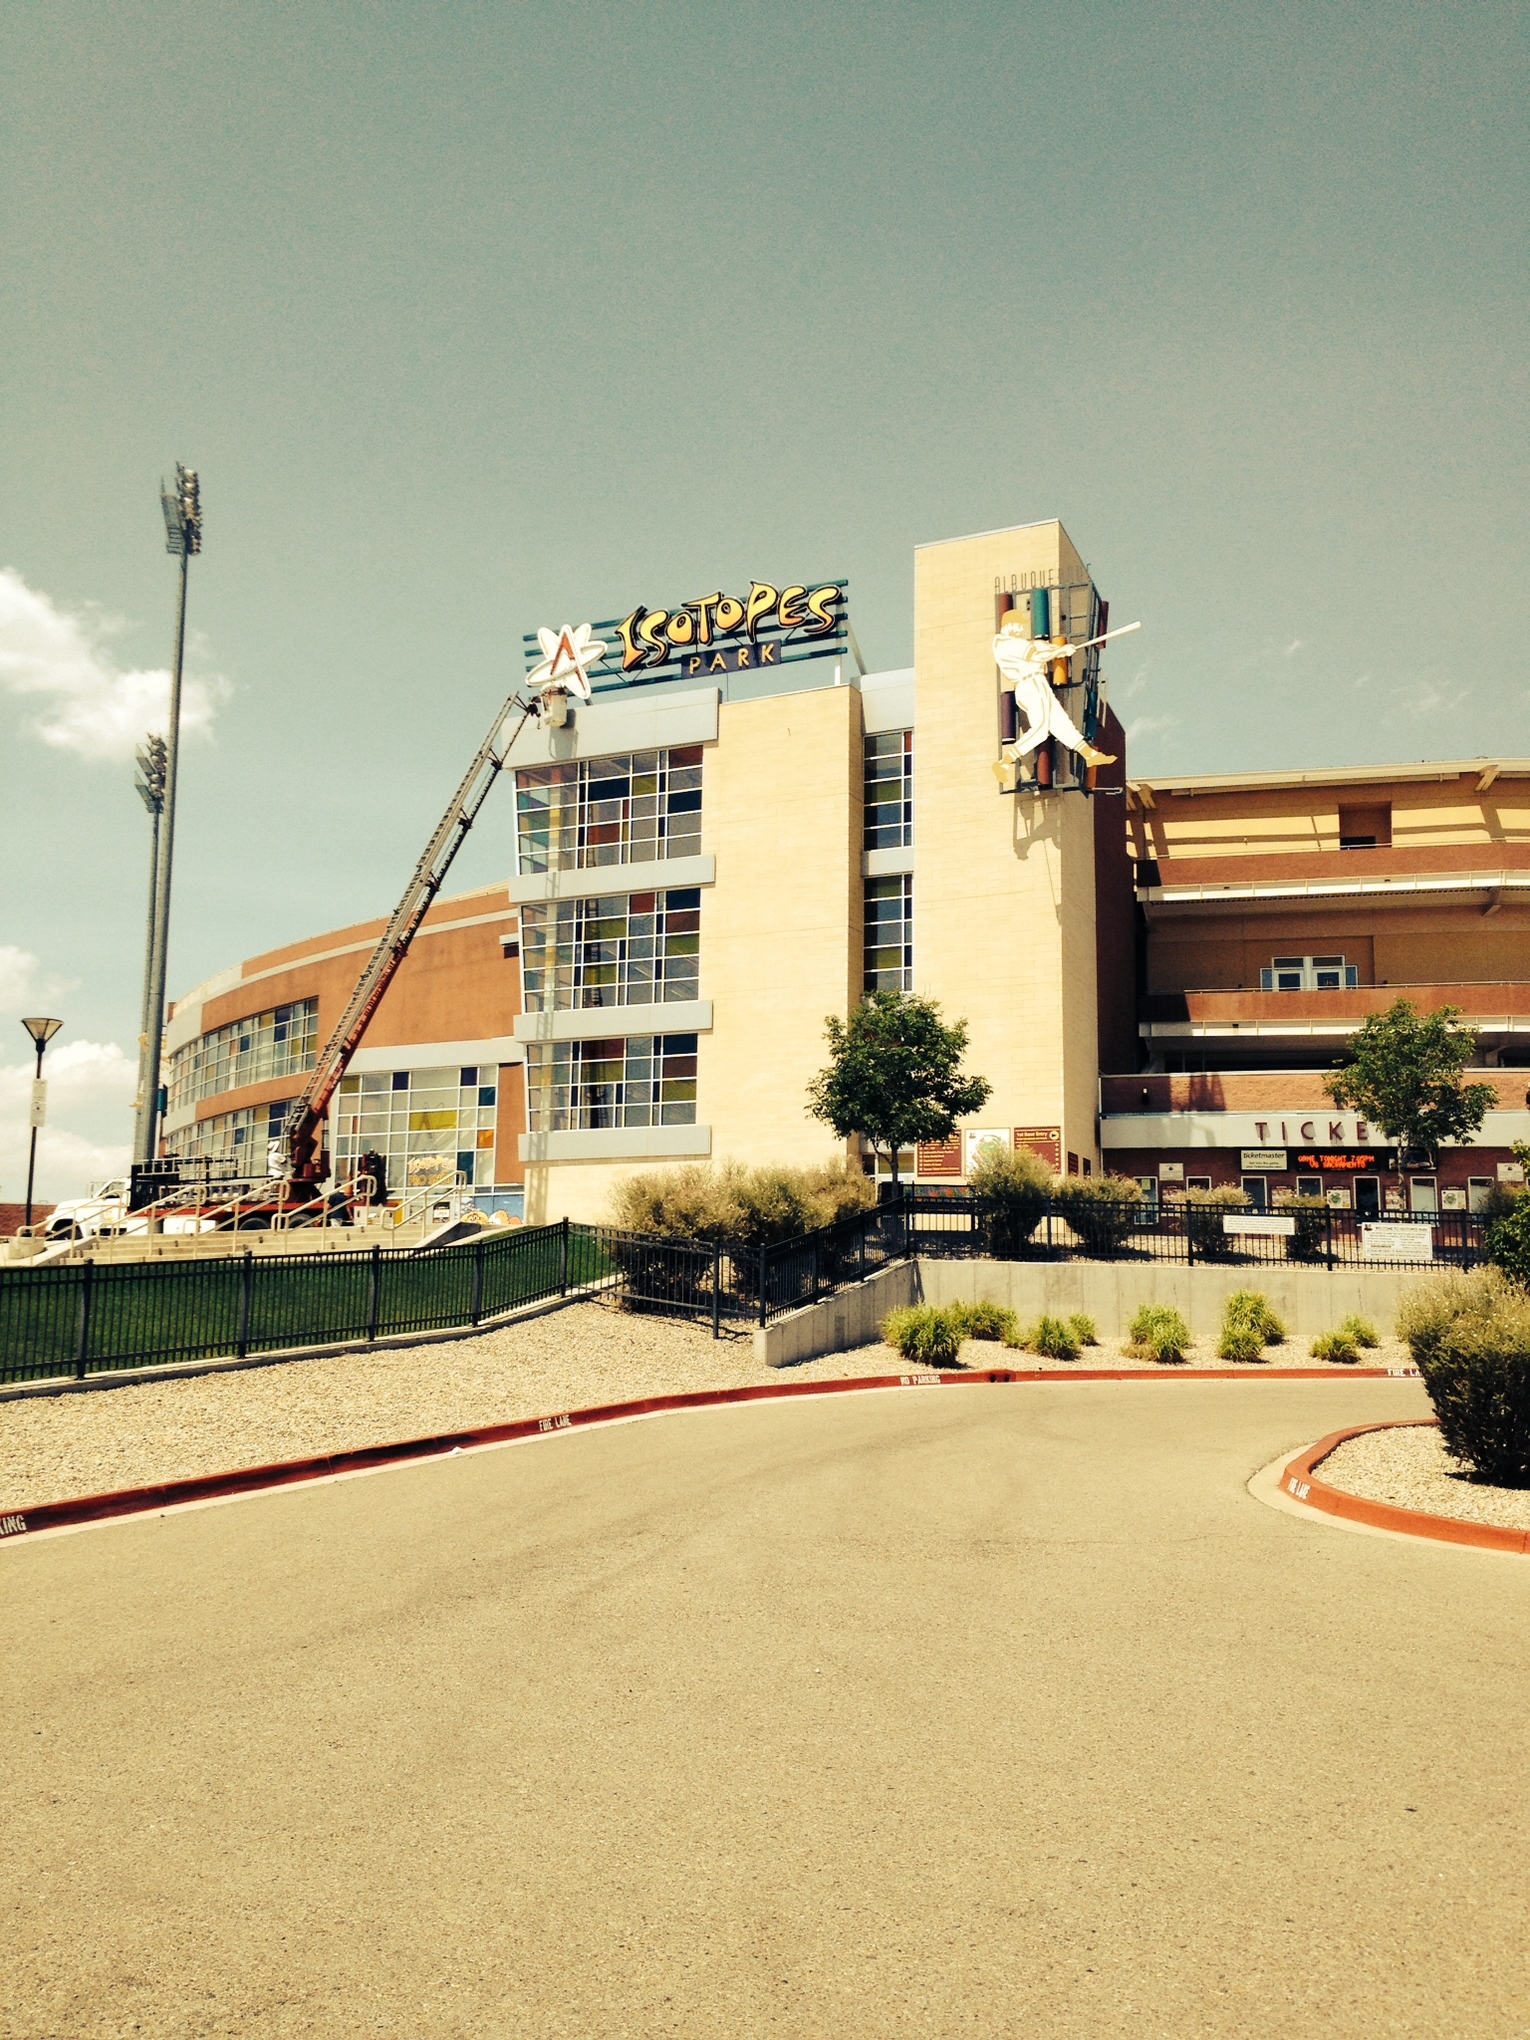 Isotopes Park (photo credit: Eric Stephen)